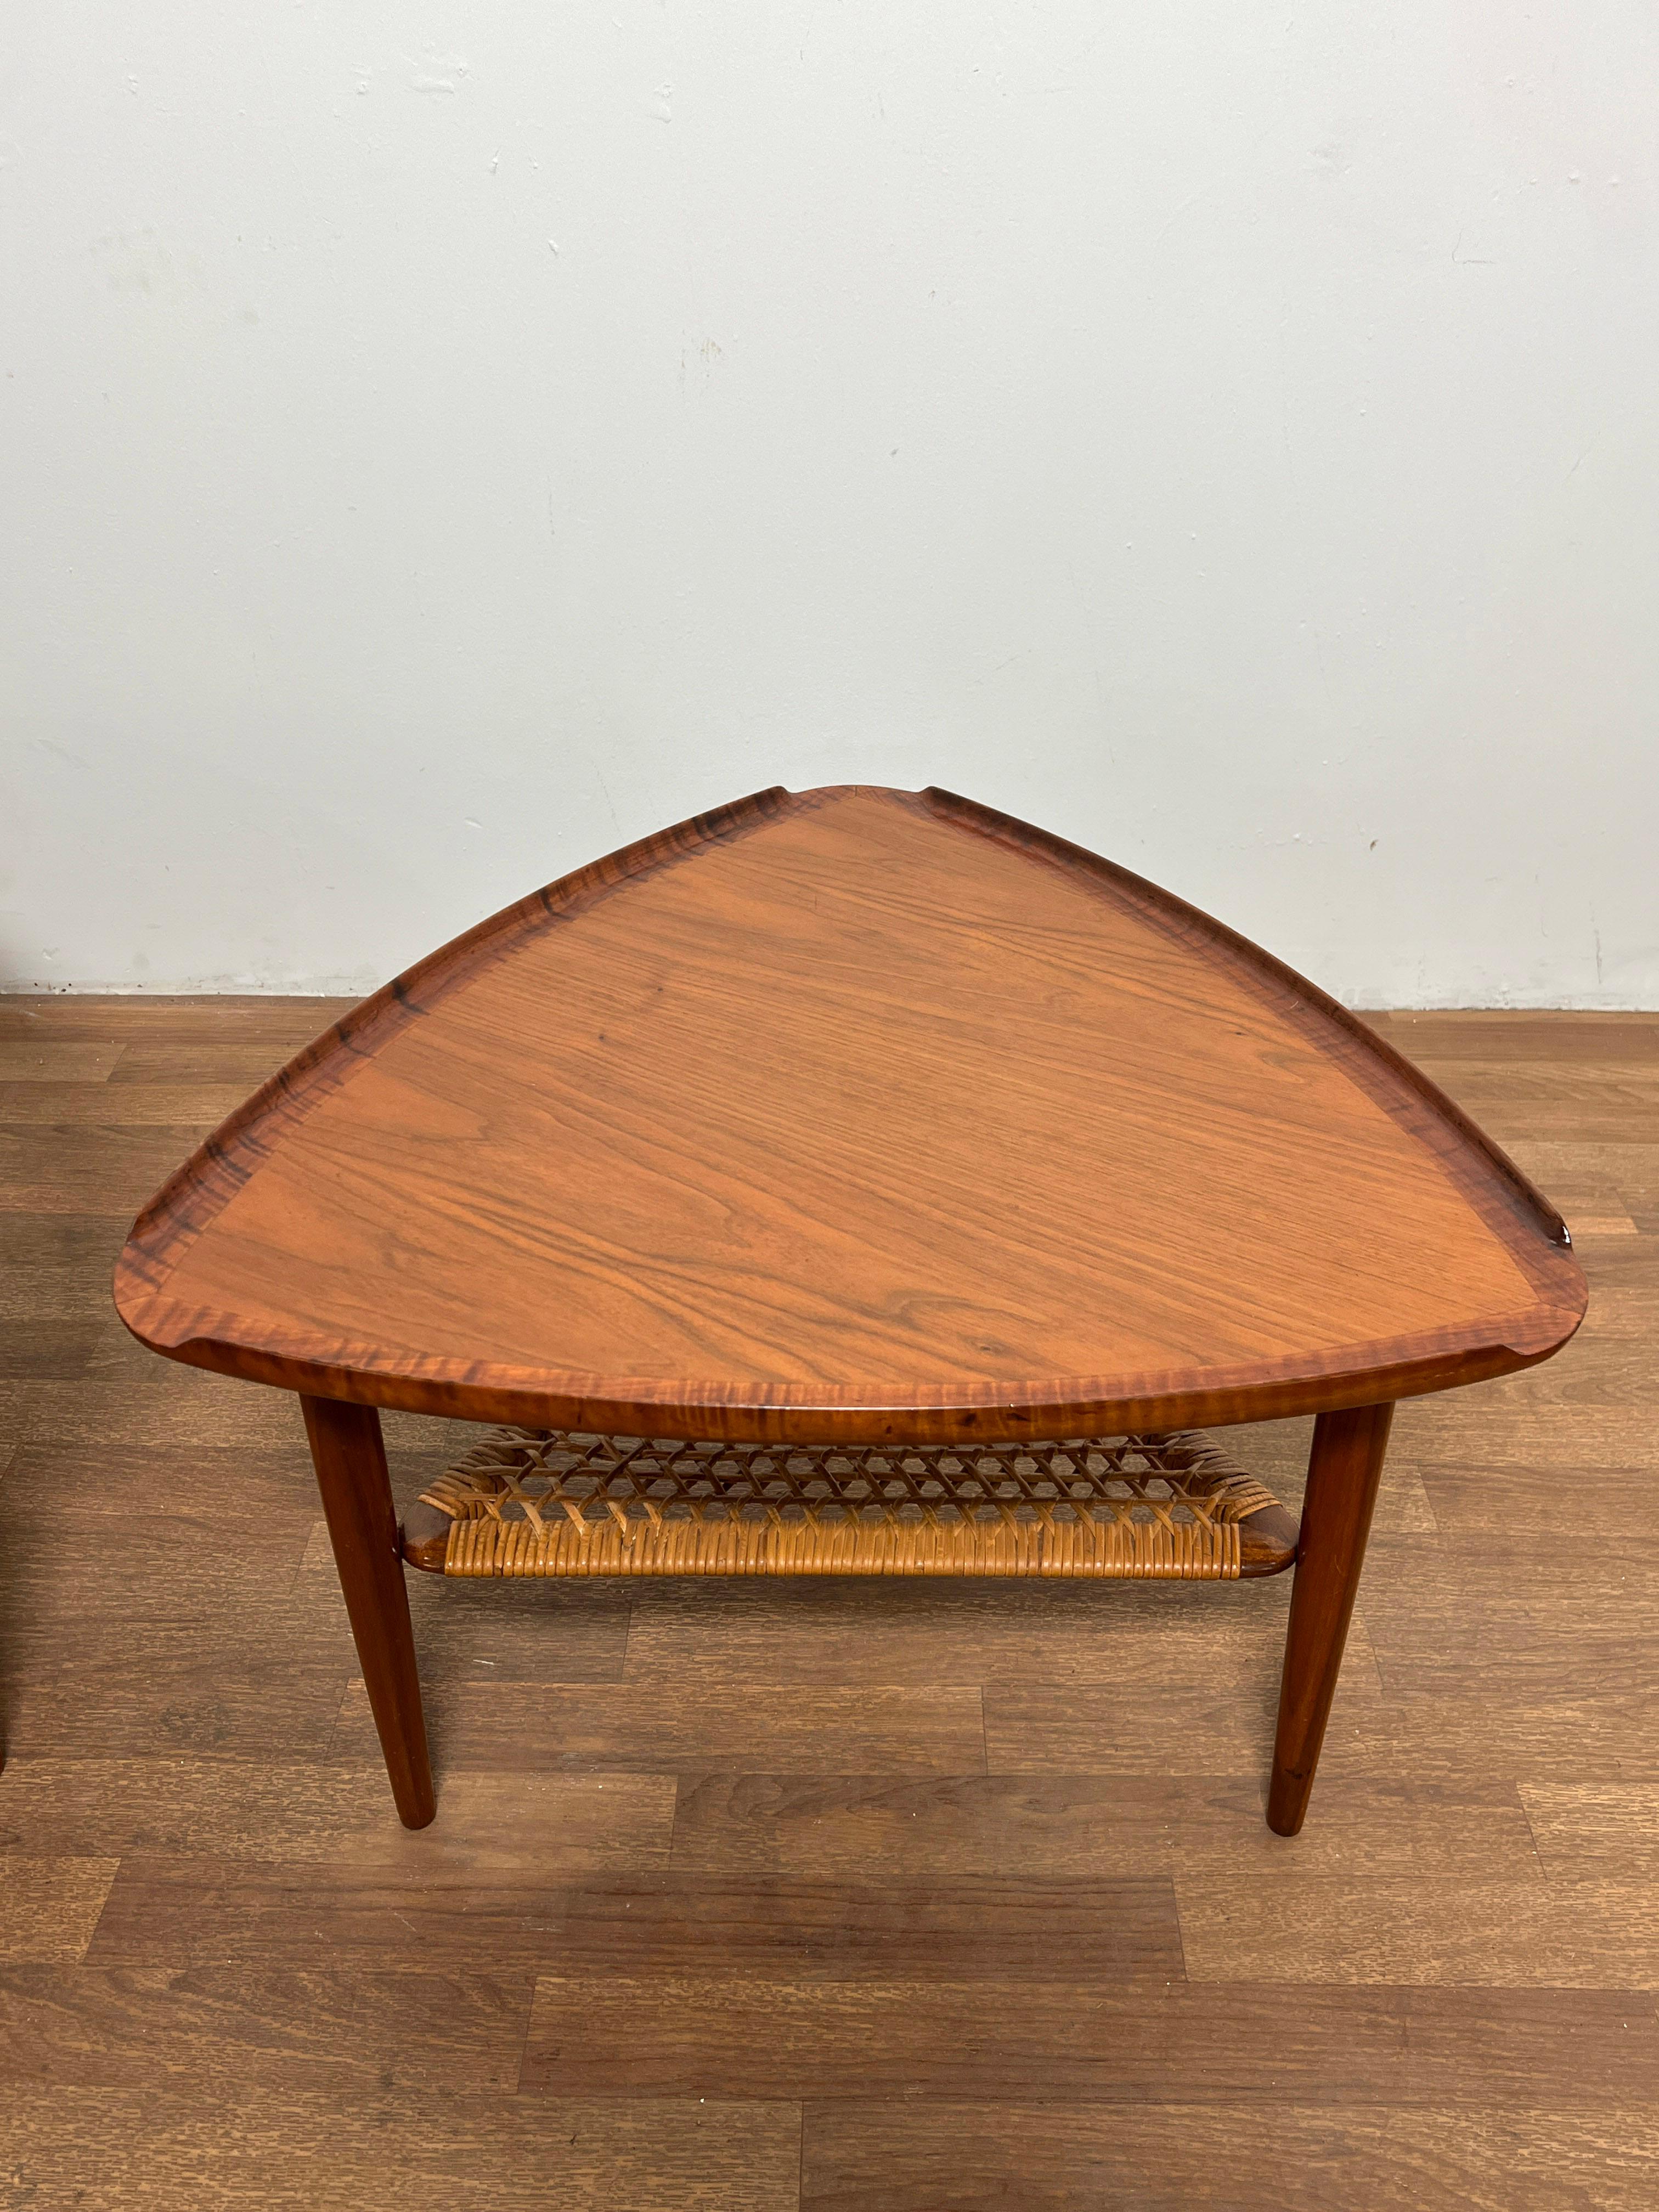 Mid-20th Century Pair of Poul Jensen for Selig Teak and Cane Tripod Side Tables C. 1960s For Sale